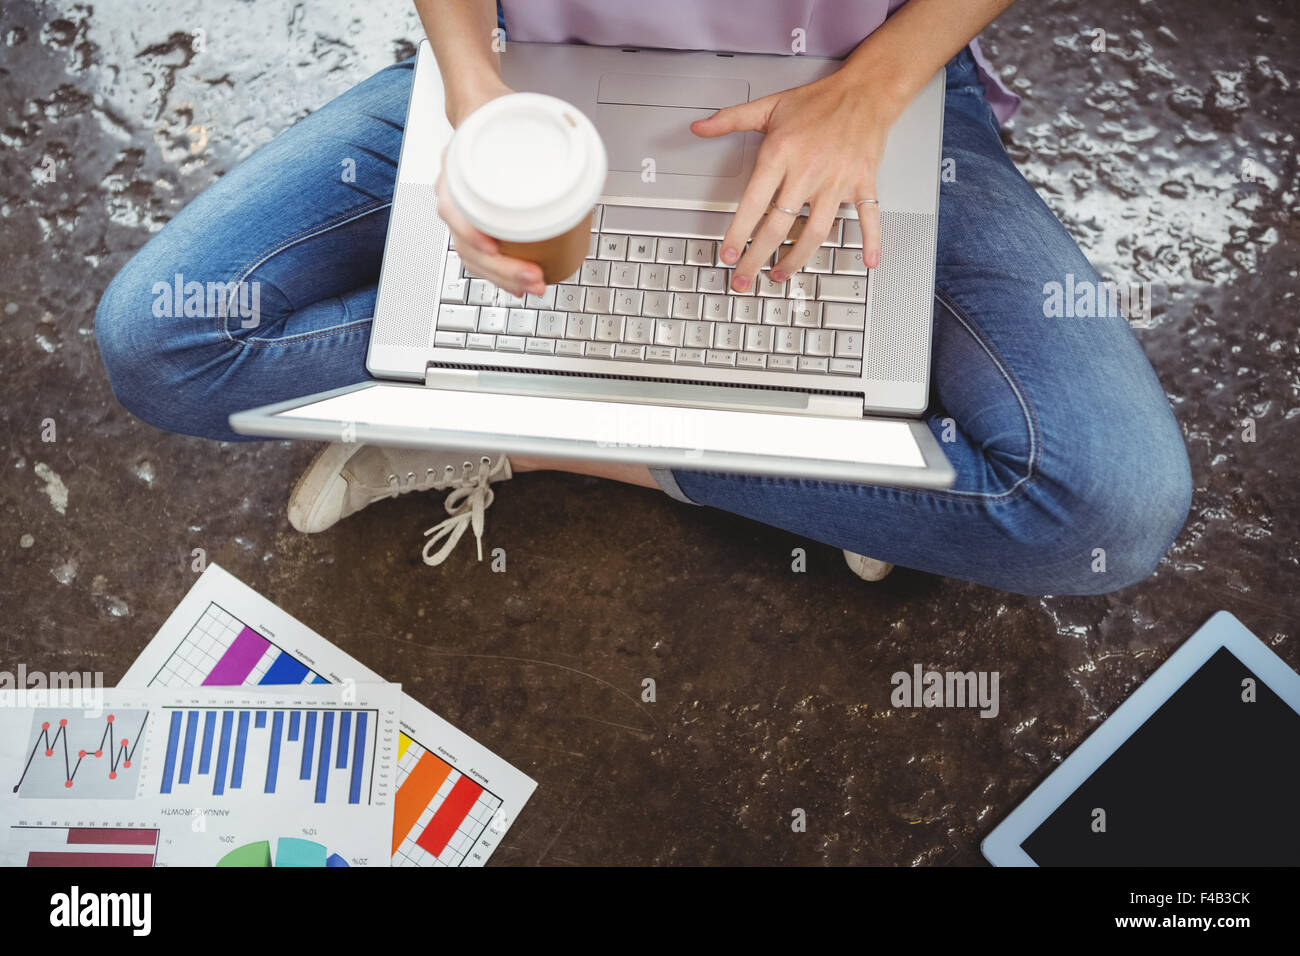 Low section of businesswoman using laptop while holding cup Stock Photo